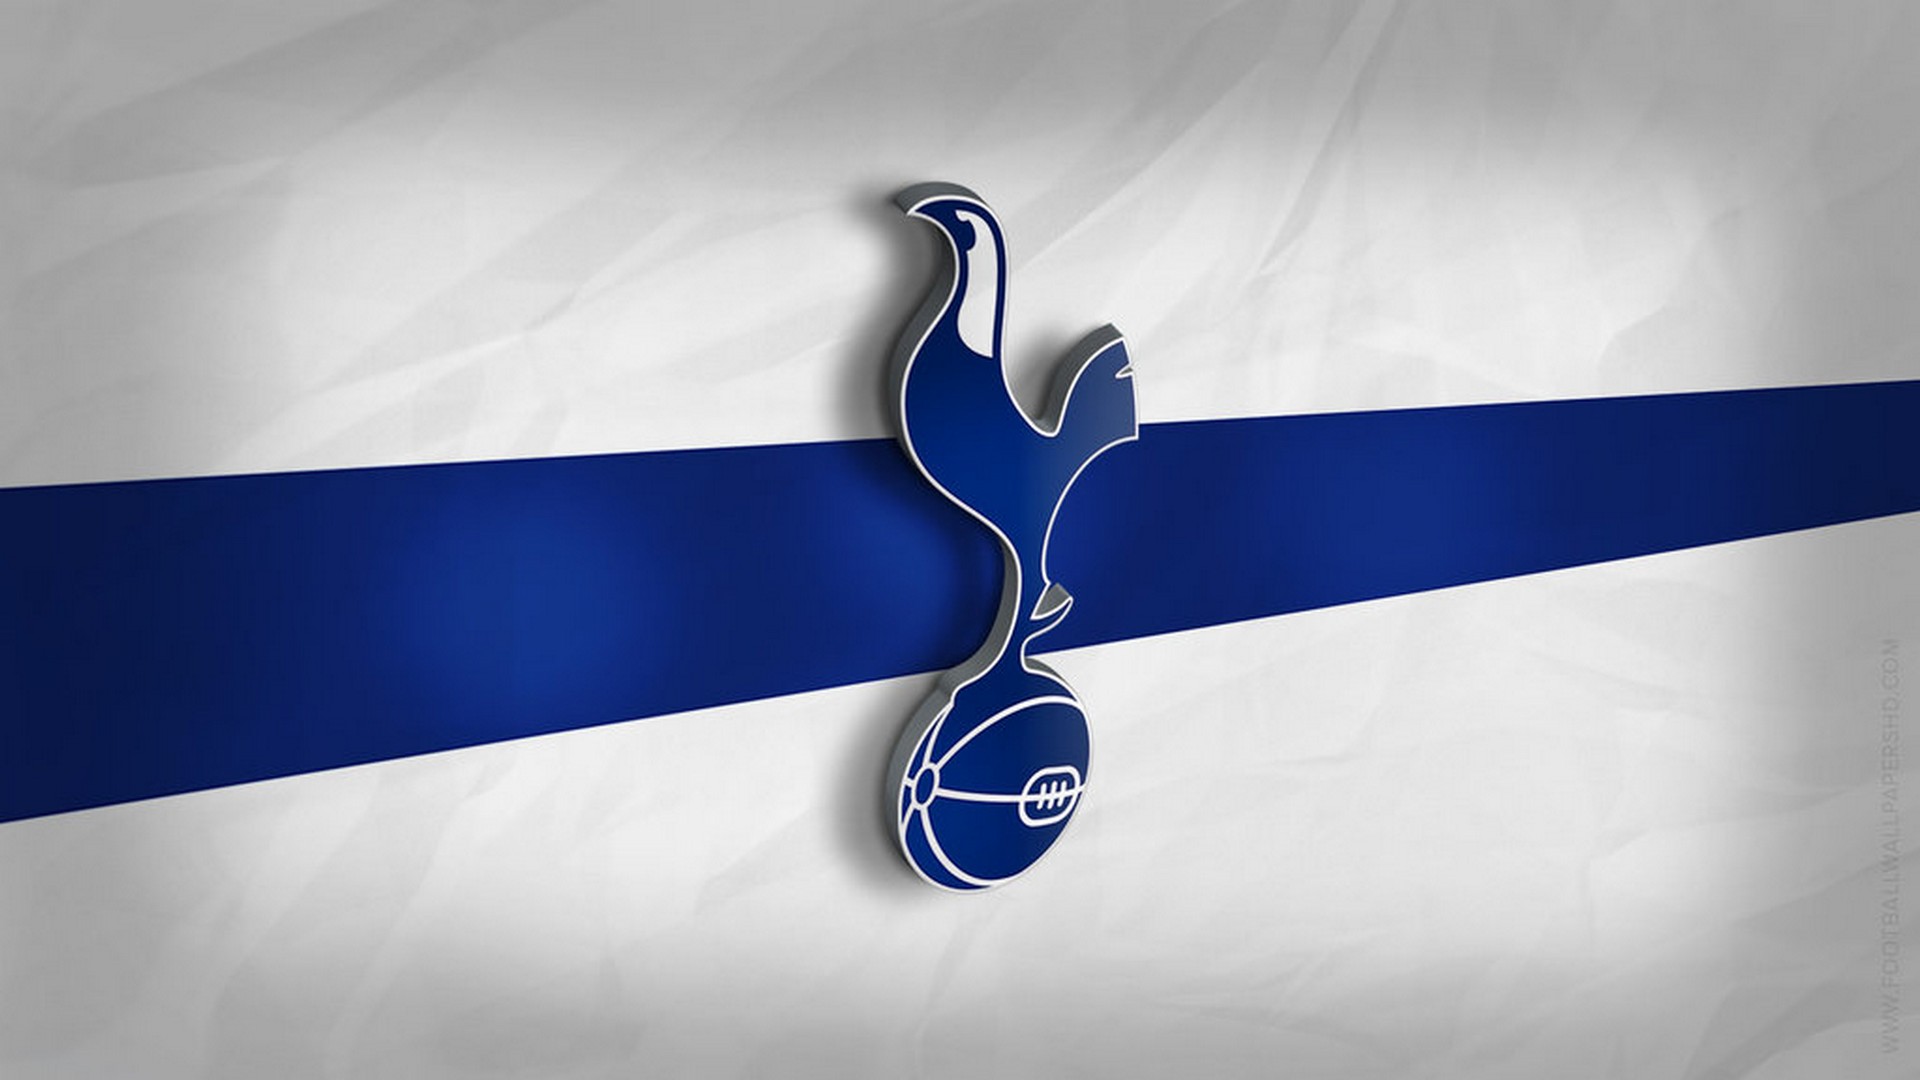 Wallpaper Tottenham Hotspur HD With high-resolution 1920X1080 pixel. You can use this wallpaper for your Desktop Computer Backgrounds, Mac Wallpapers, Android Lock screen or iPhone Screensavers and another smartphone device